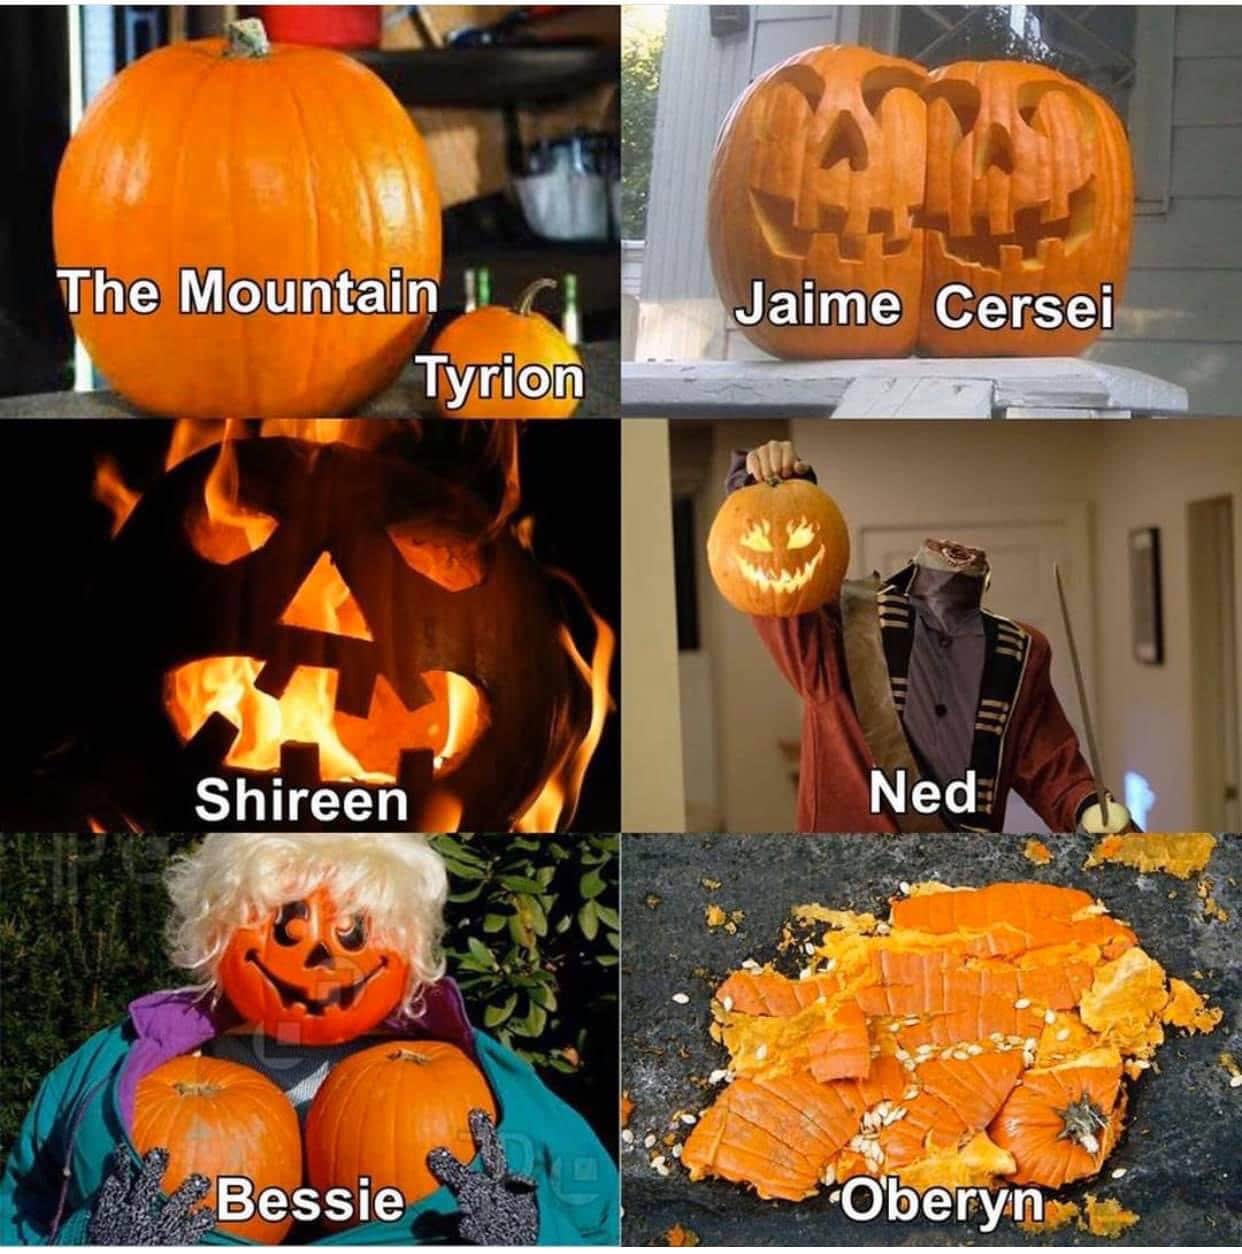 game-of-thrones game-of-thrones-memes game-of-thrones text: The Mountain Tyrion Shireen Bessie Jaime Cerseie Ned 'Obeiyn 